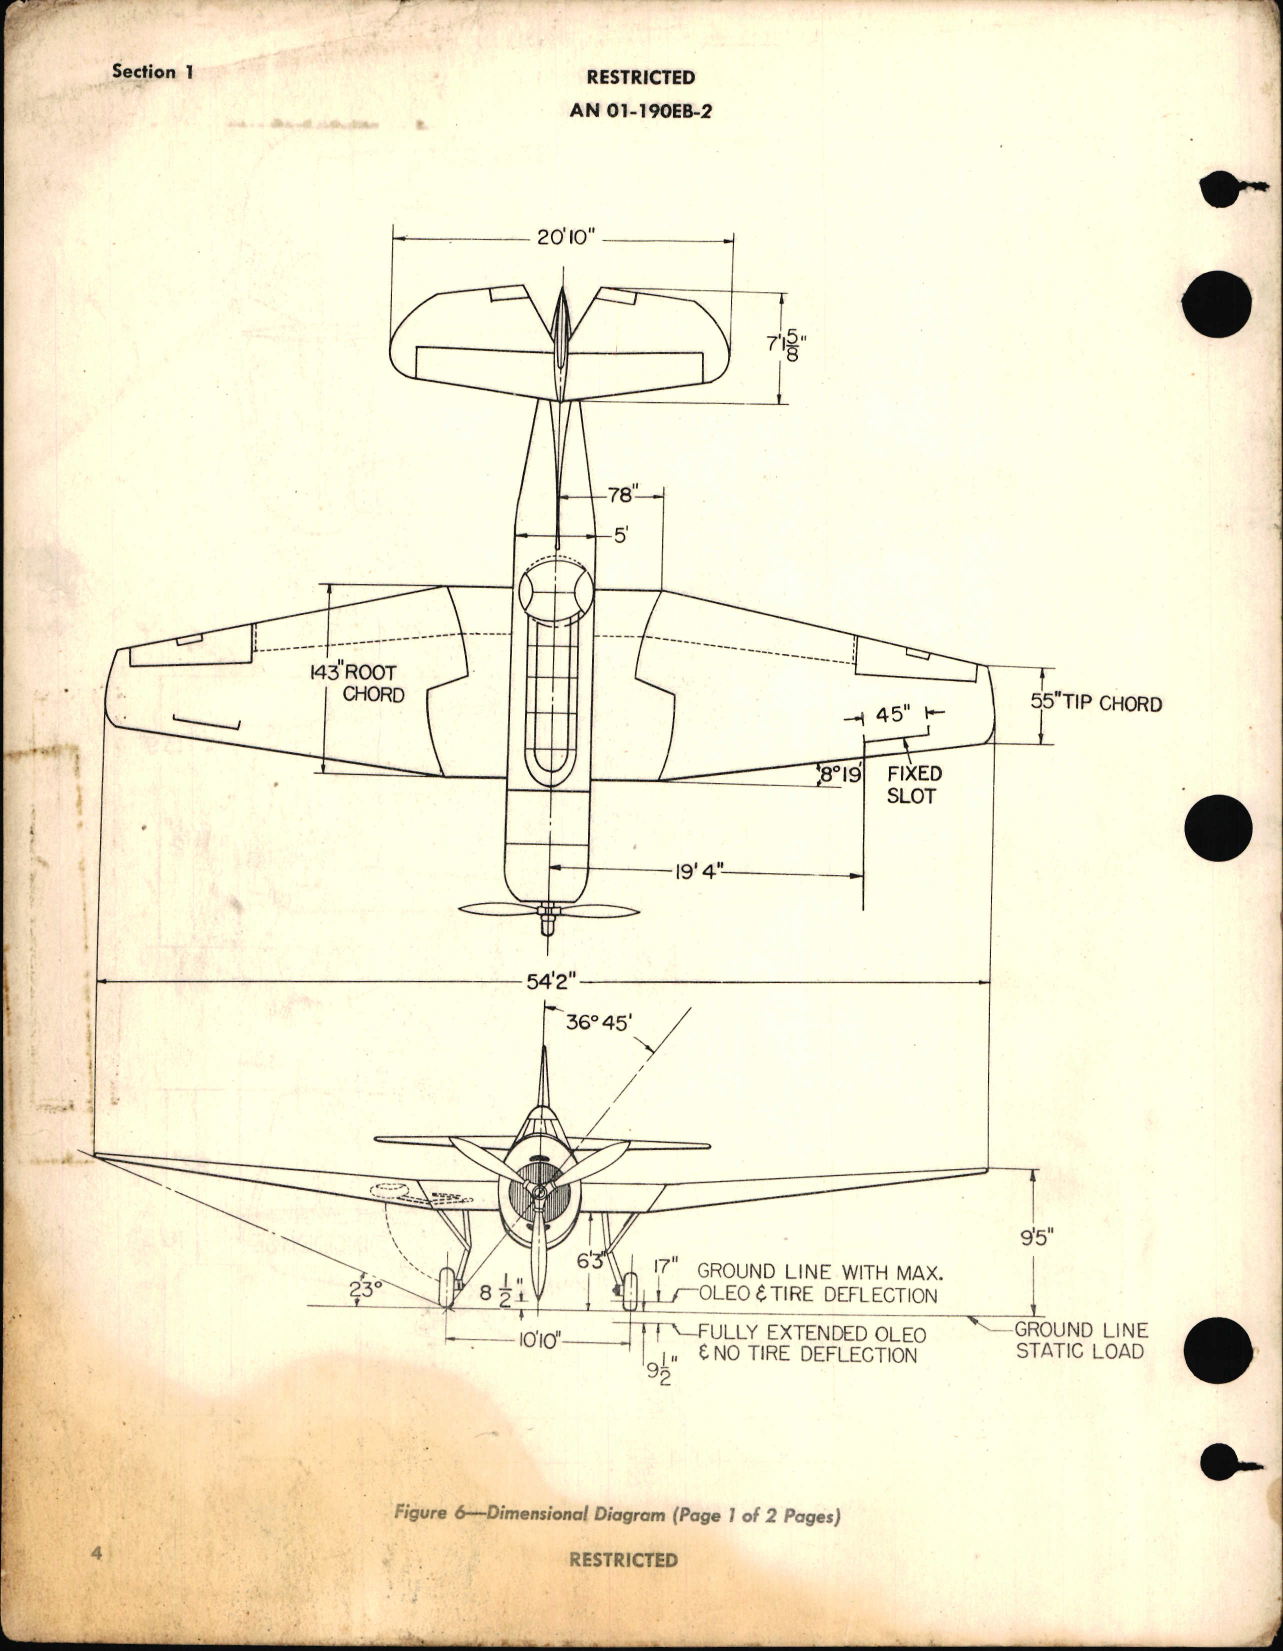 Sample page 8 from AirCorps Library document: Erection & Maintenance for TBM-3 Aircraft